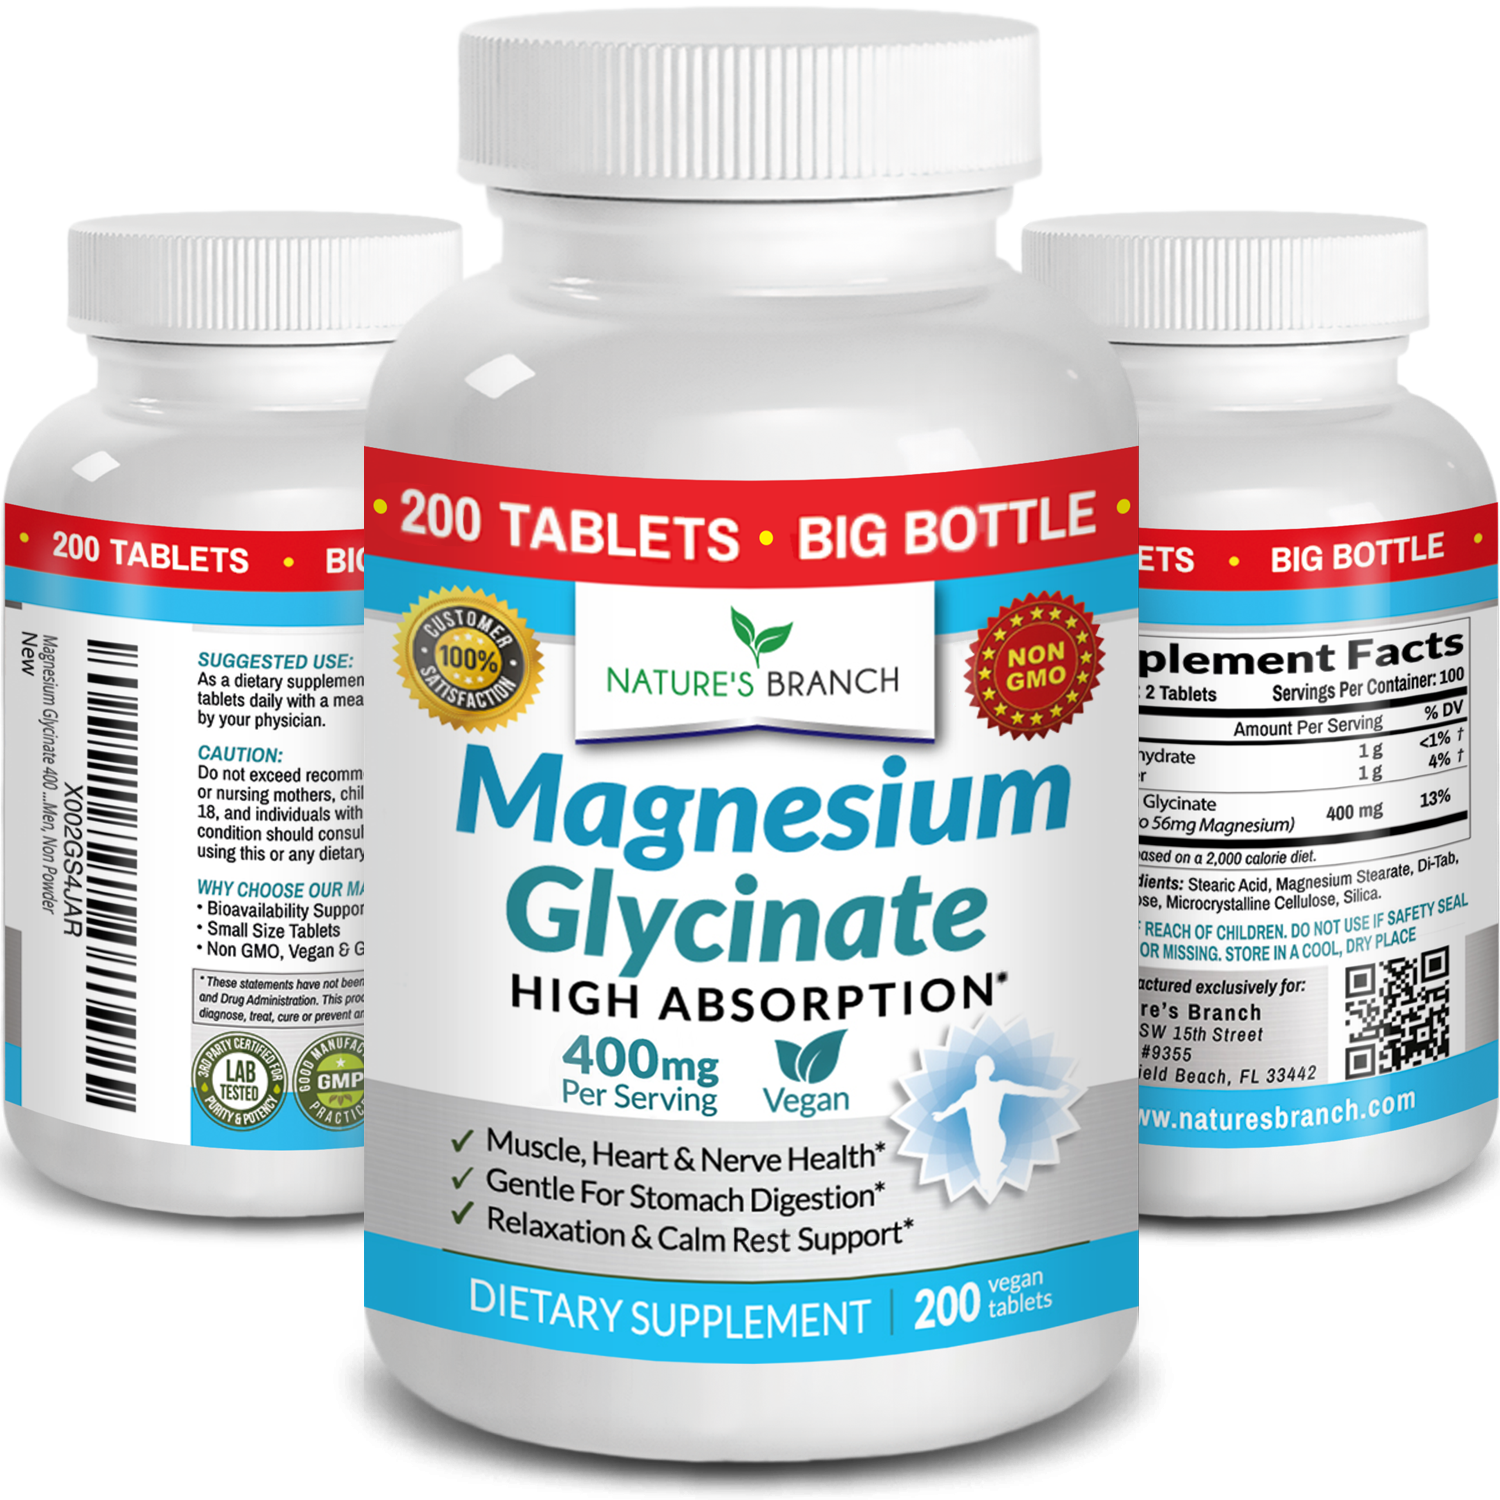 Nature's Branch Magnesium Glycinate 400mg supplement bottles